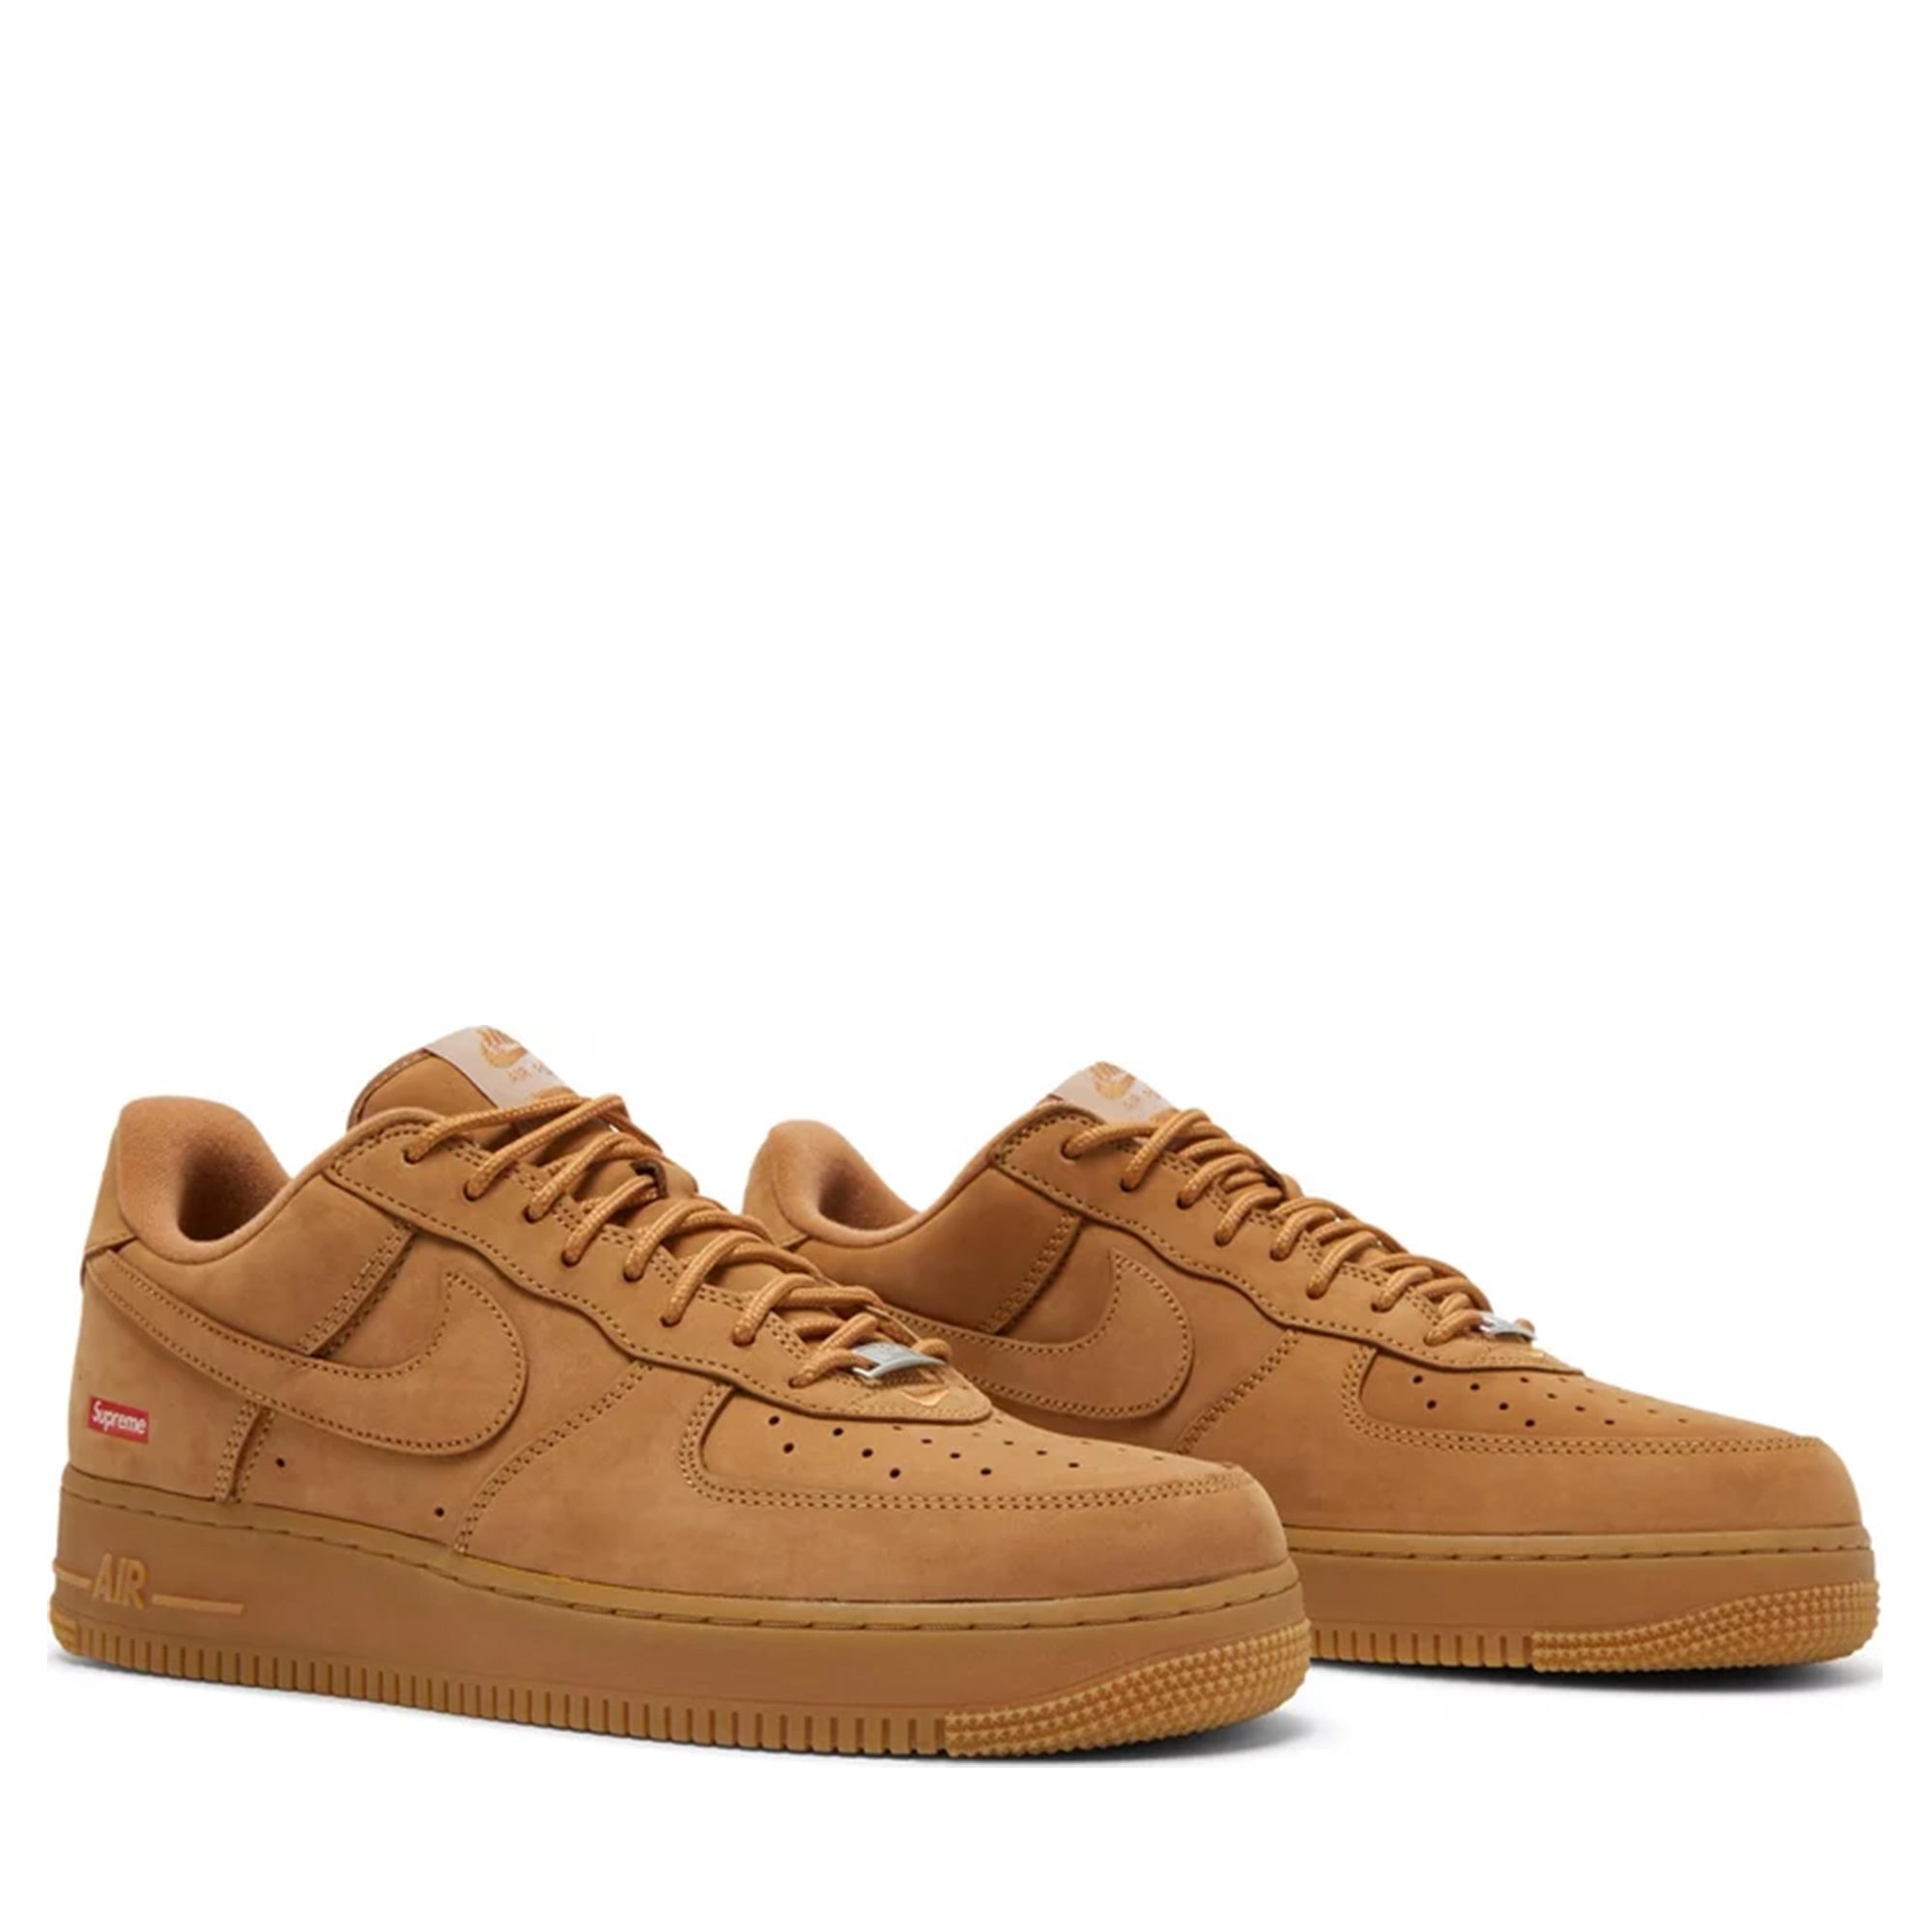 Nike Air Force 1 Low SP Supreme Wheat-PLUS